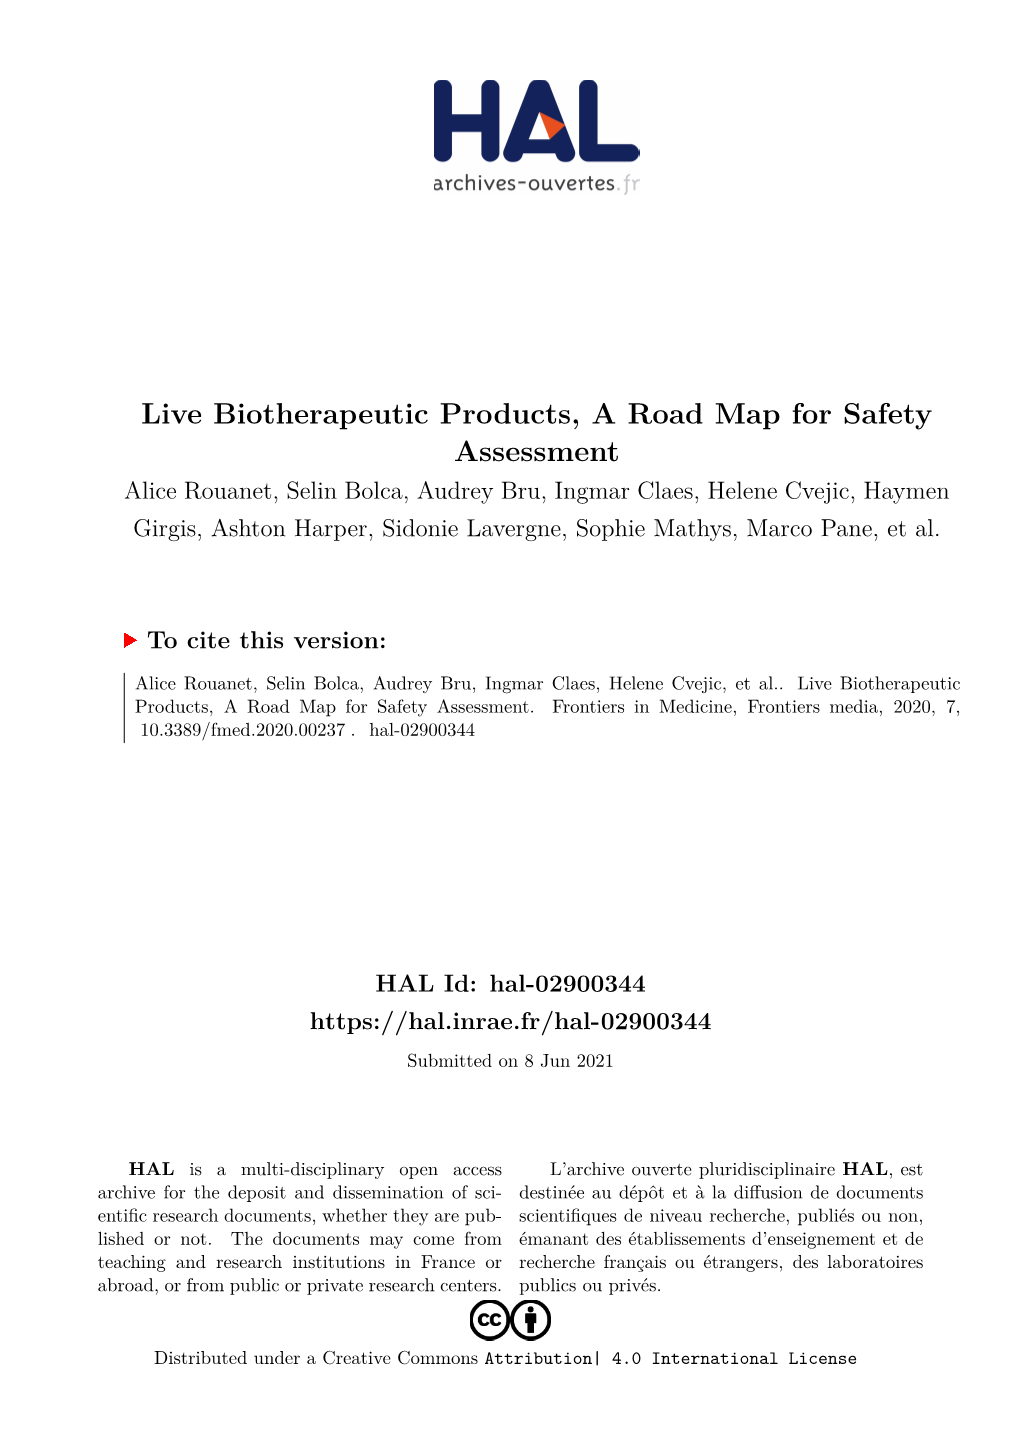 Live Biotherapeutic Products, a Road Map for Safety Assessment